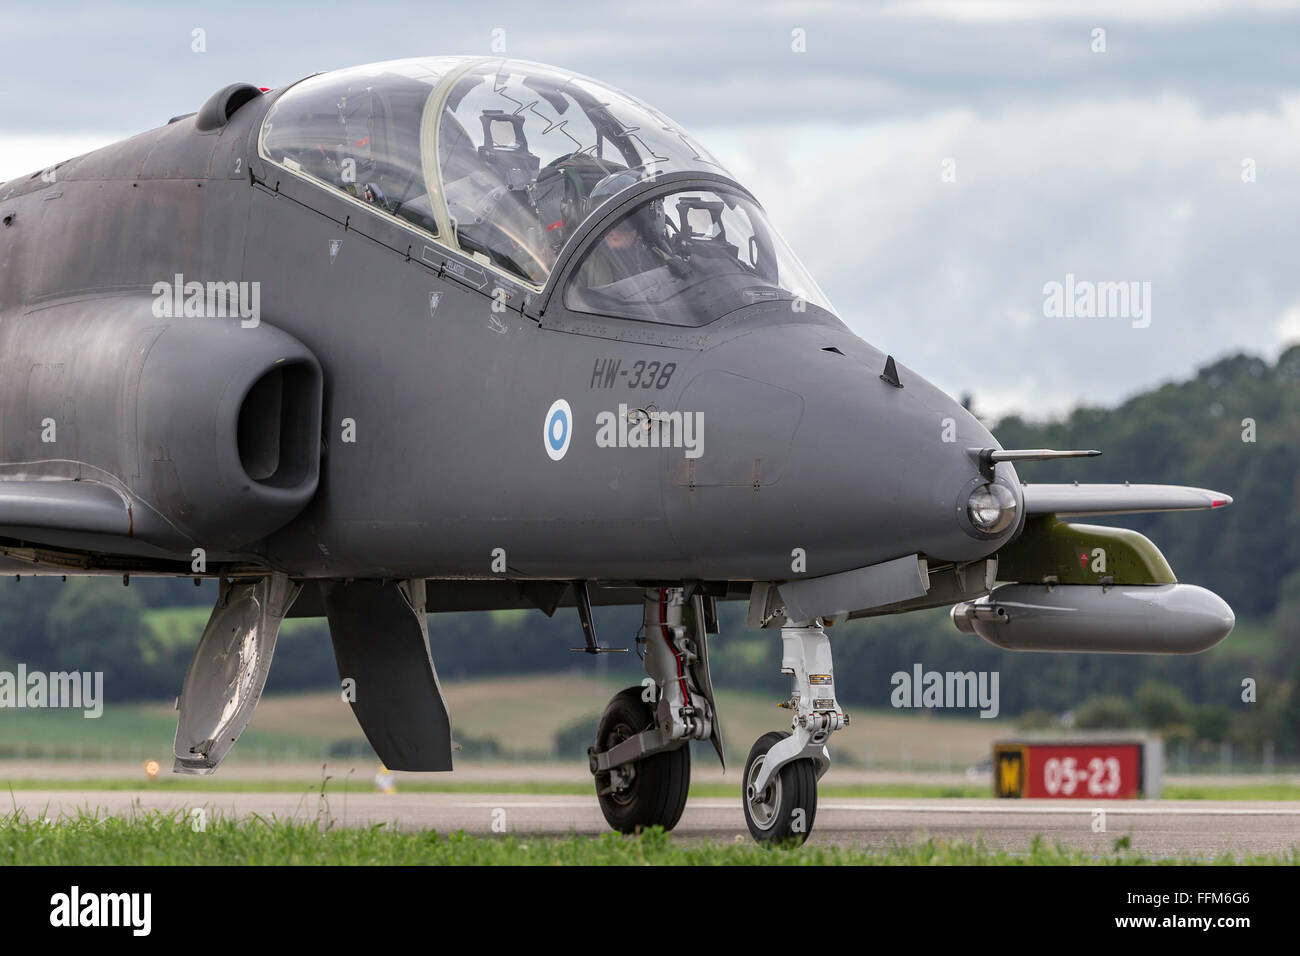 Finnish Air Force operated British Aerospace Hawk Mk.51 jet trainer aircraft of the Midnight Hawks formation display team Stock Photo